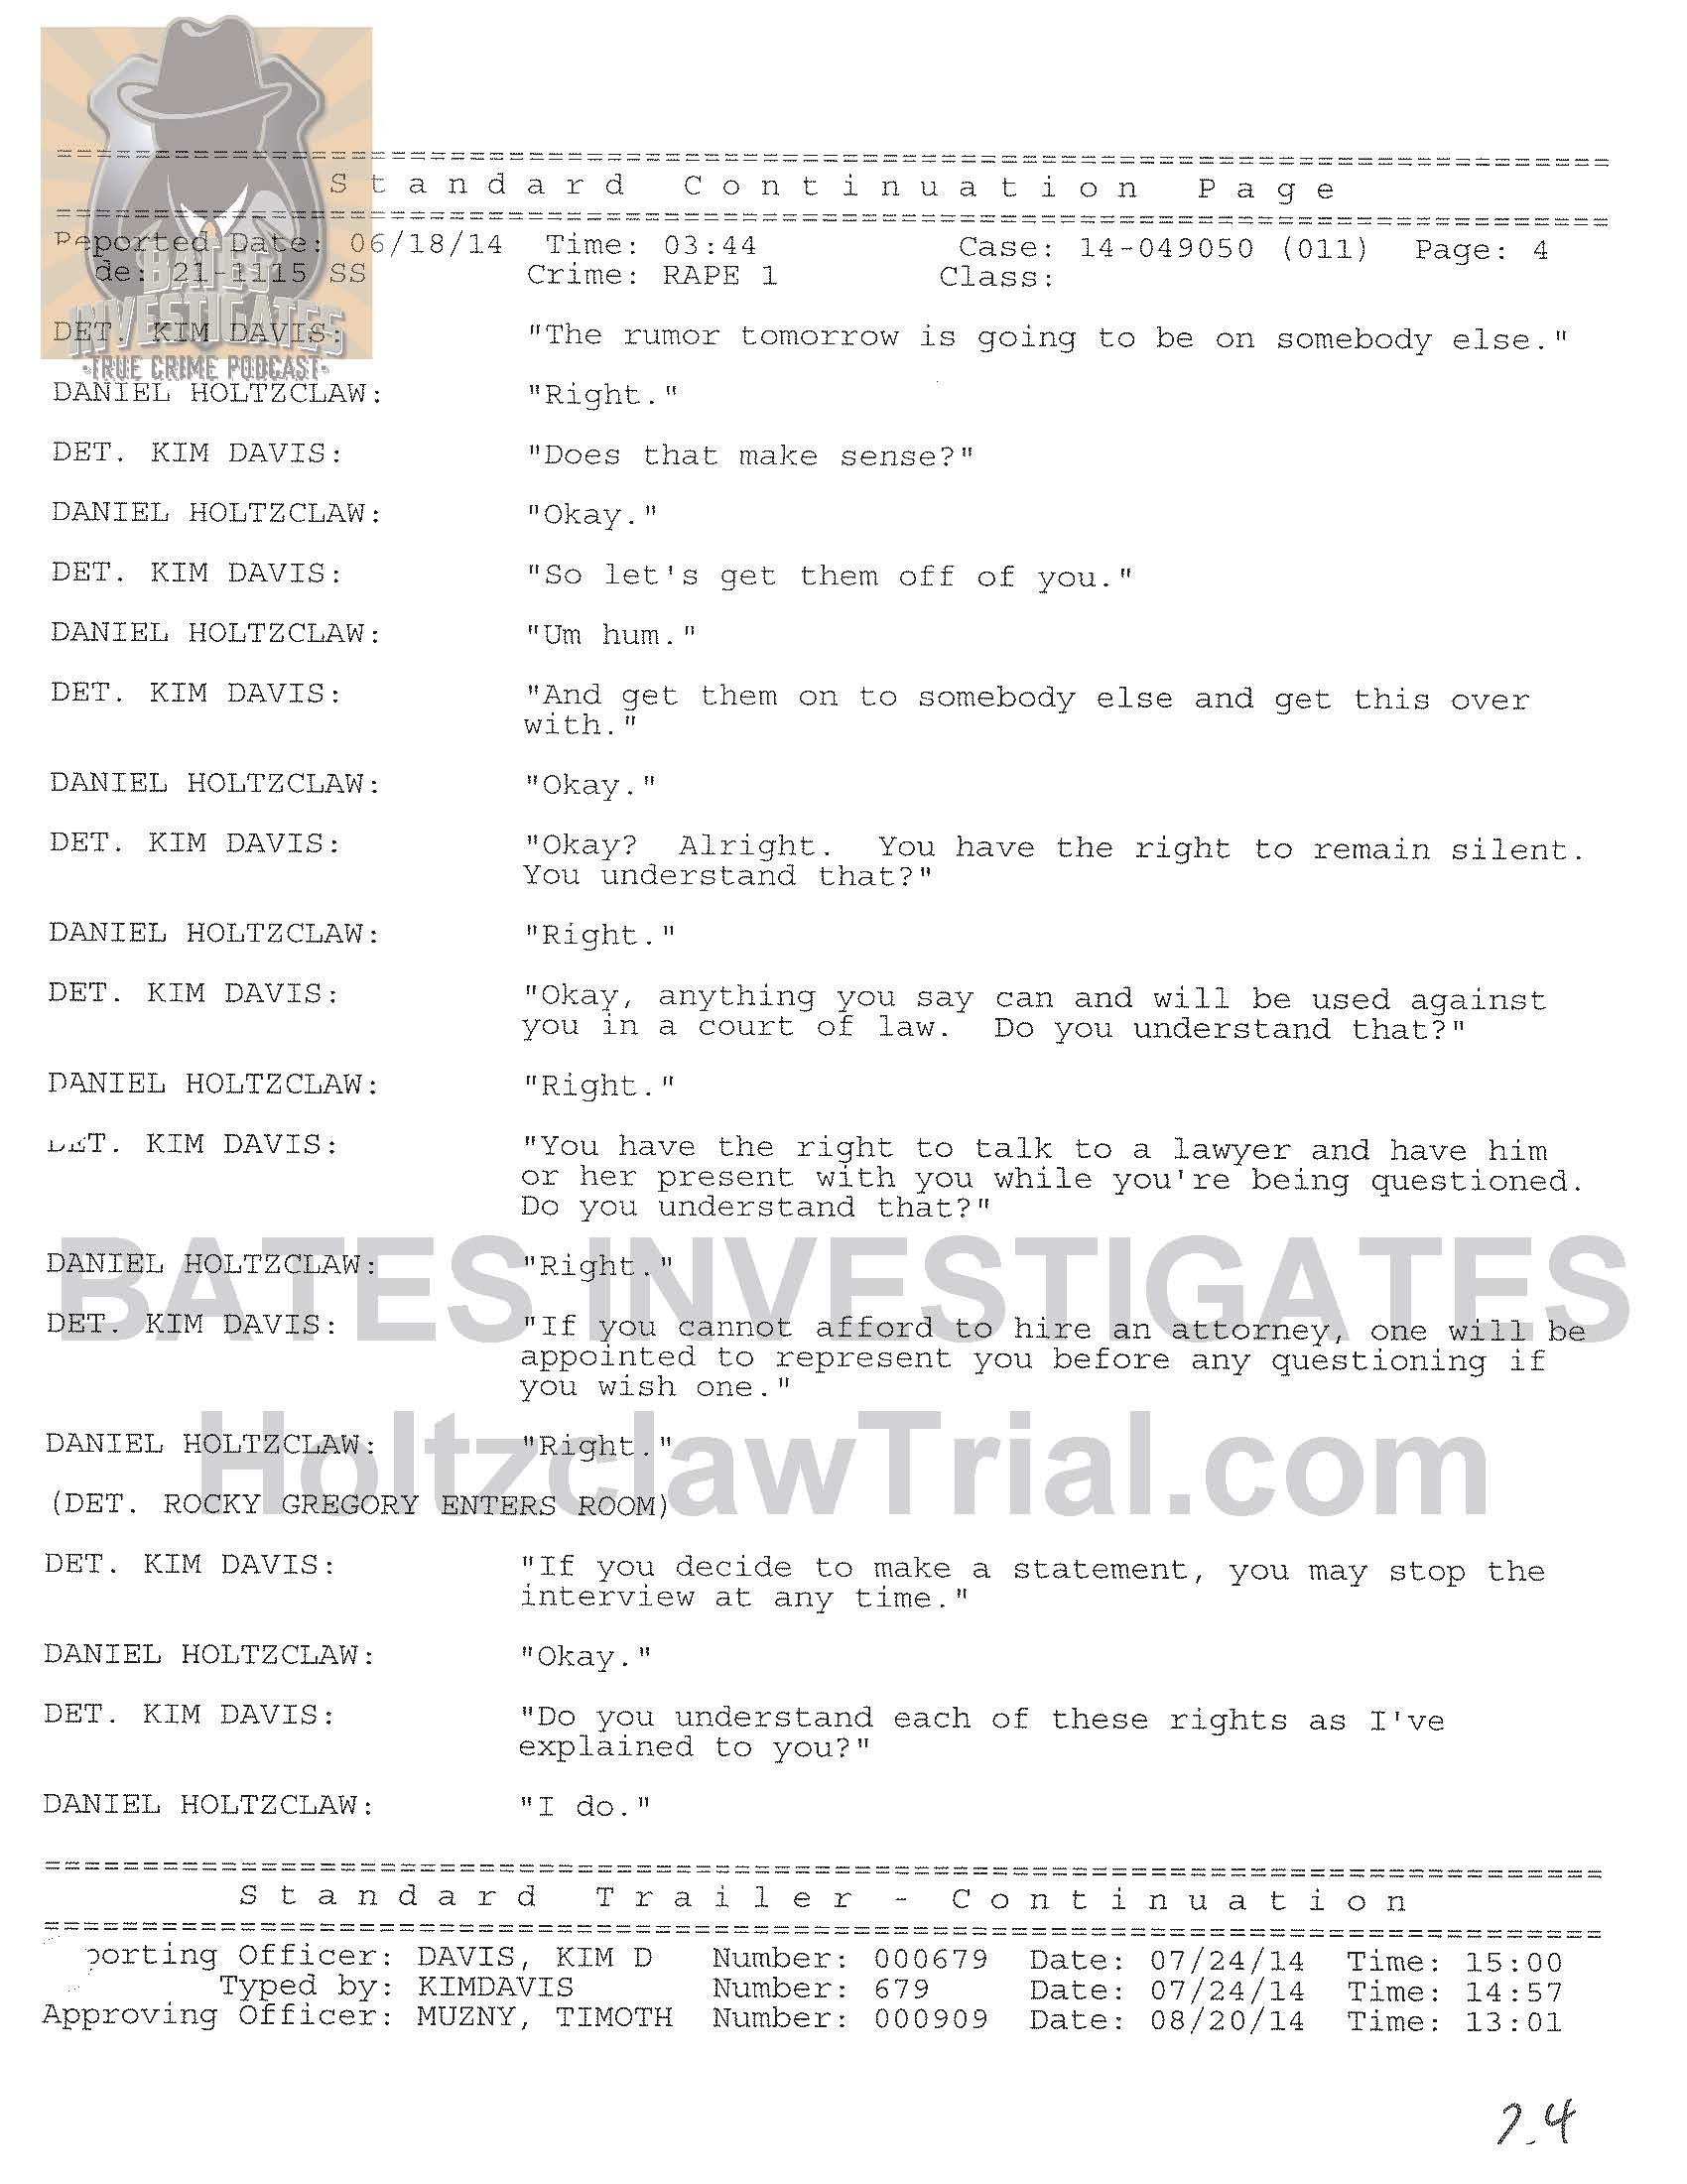 Holtzclaw Interrogation Transcript - Ep02 Redacted_Page_04.jpg